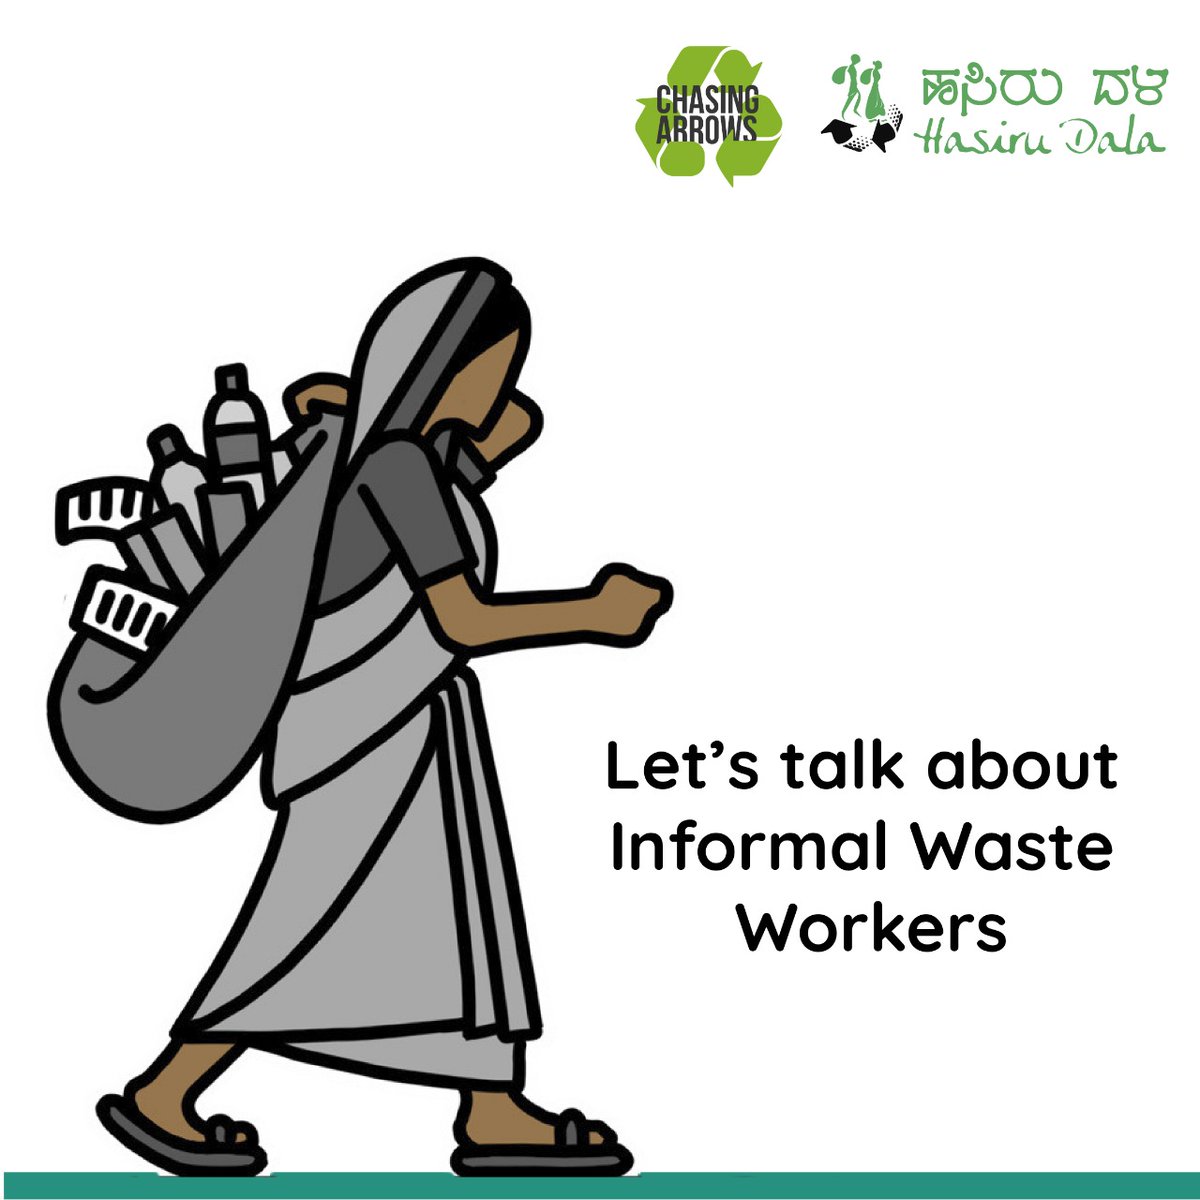 In today's post for our series #ChasingArrows we talk about informal waste workers. Who are they, and what do they do? (1/3)
#inclusionofinformalsector #globalplastictreaty